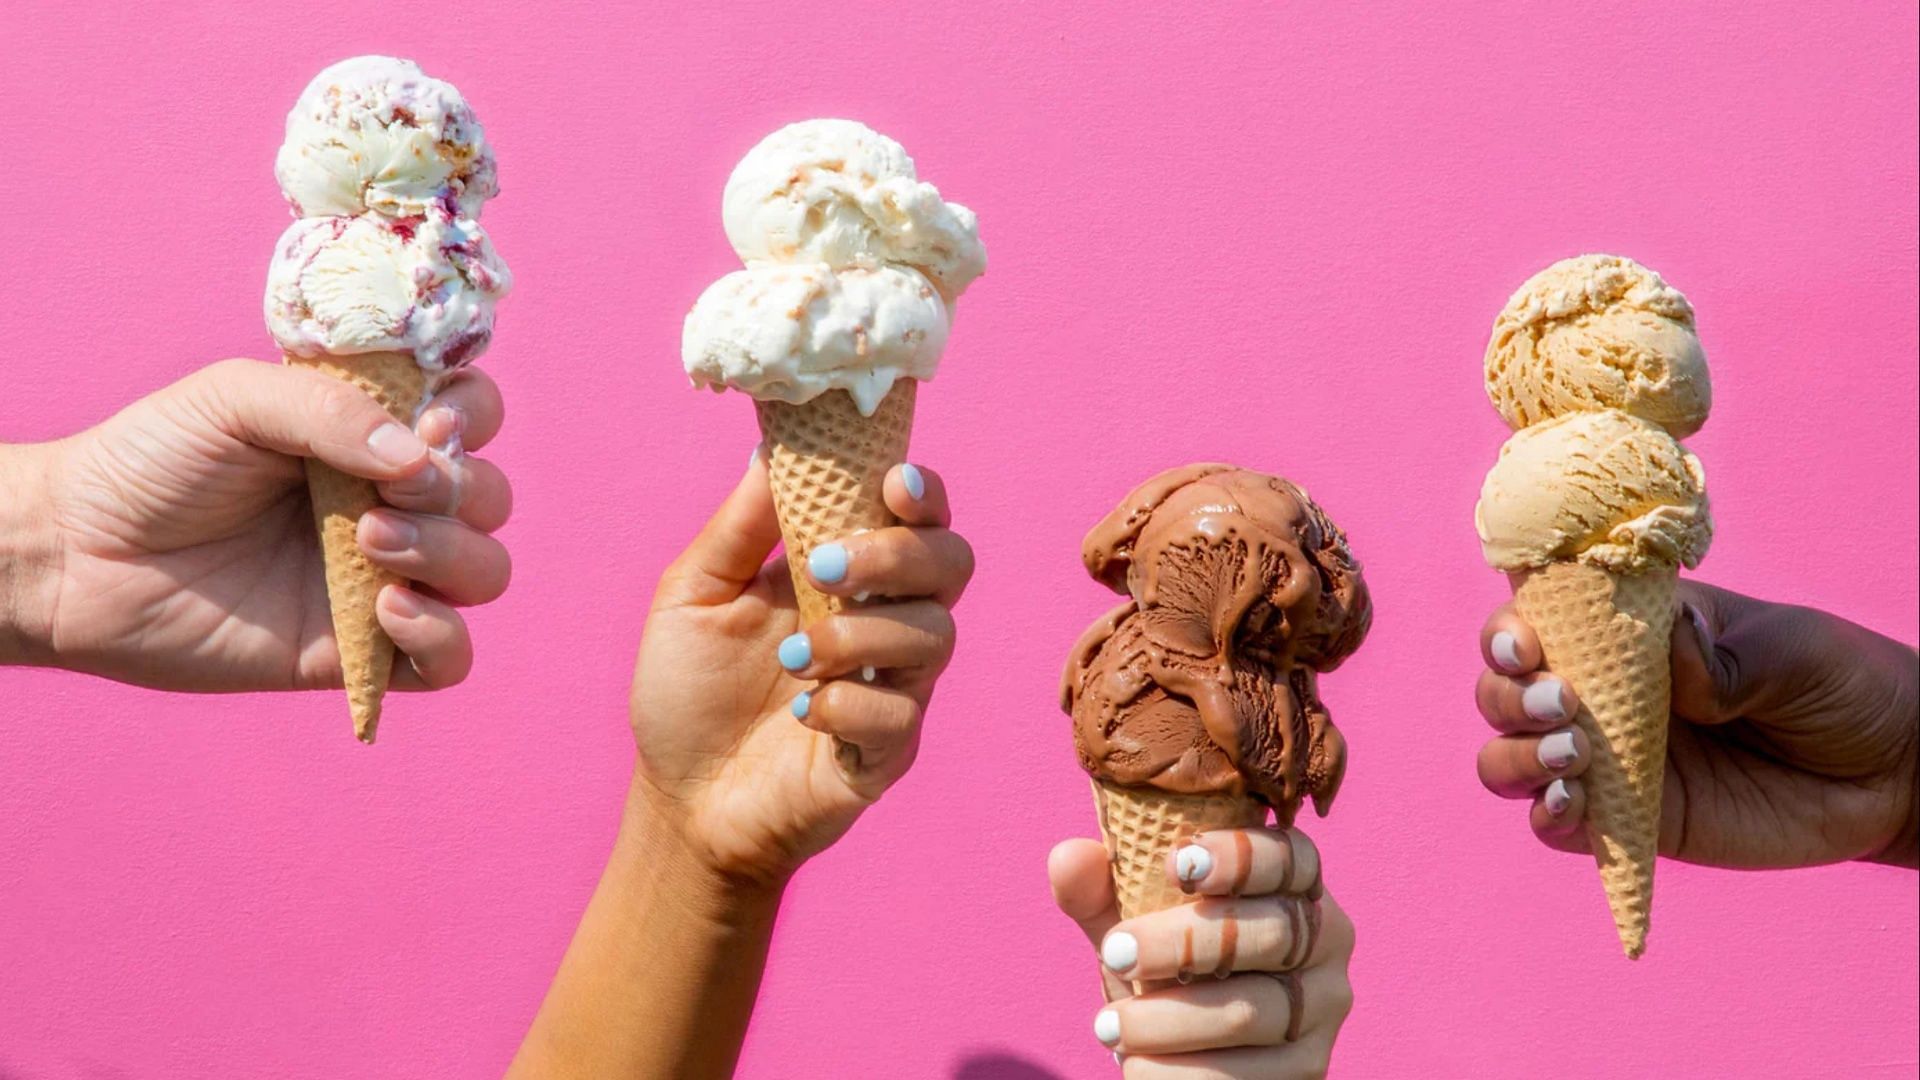 The free scoops of ice cream can be enjoyed all night across the country (Image via Jeni&#039;s Splendid Ice Creams)